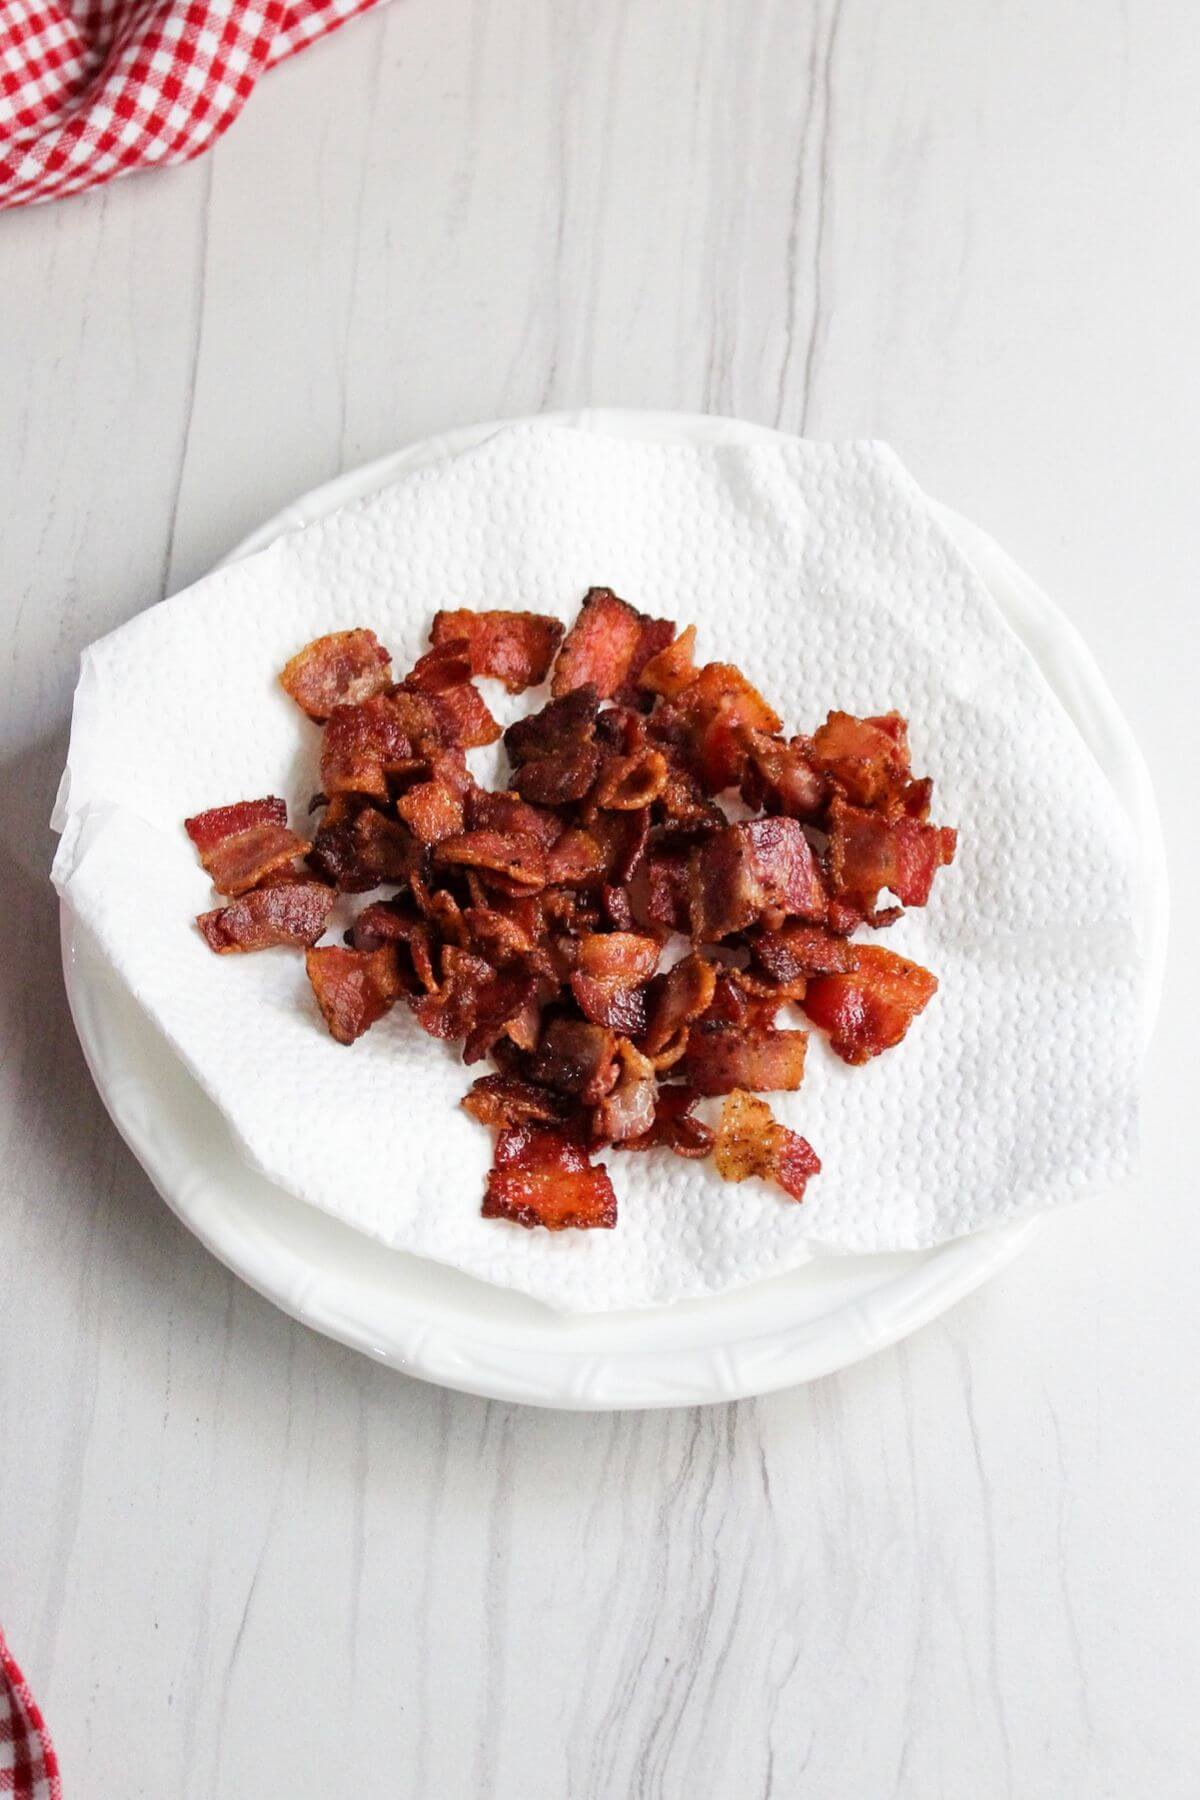 Cooked bacon pieces on paper towels.